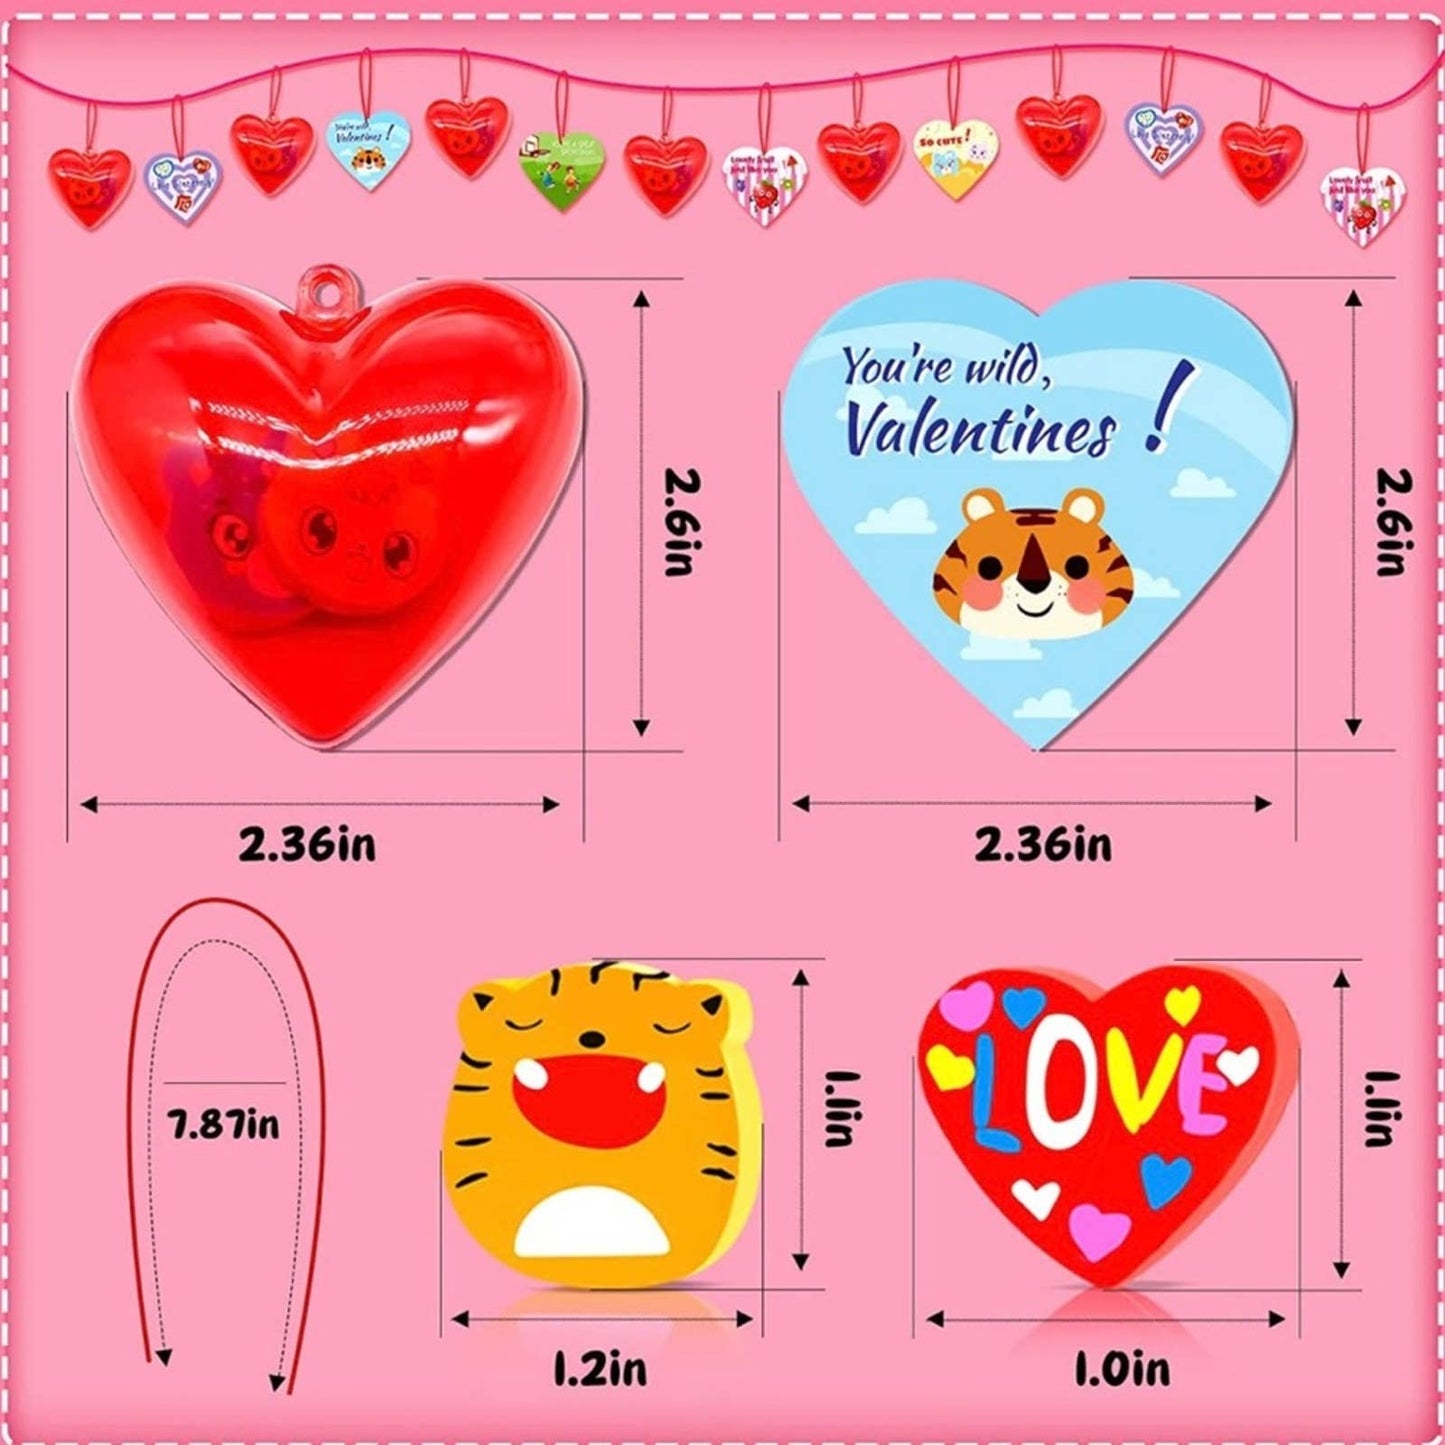 Valentines Day Gifts for Kids-40 Valentine Cards for Kids 80 Mini Erasers